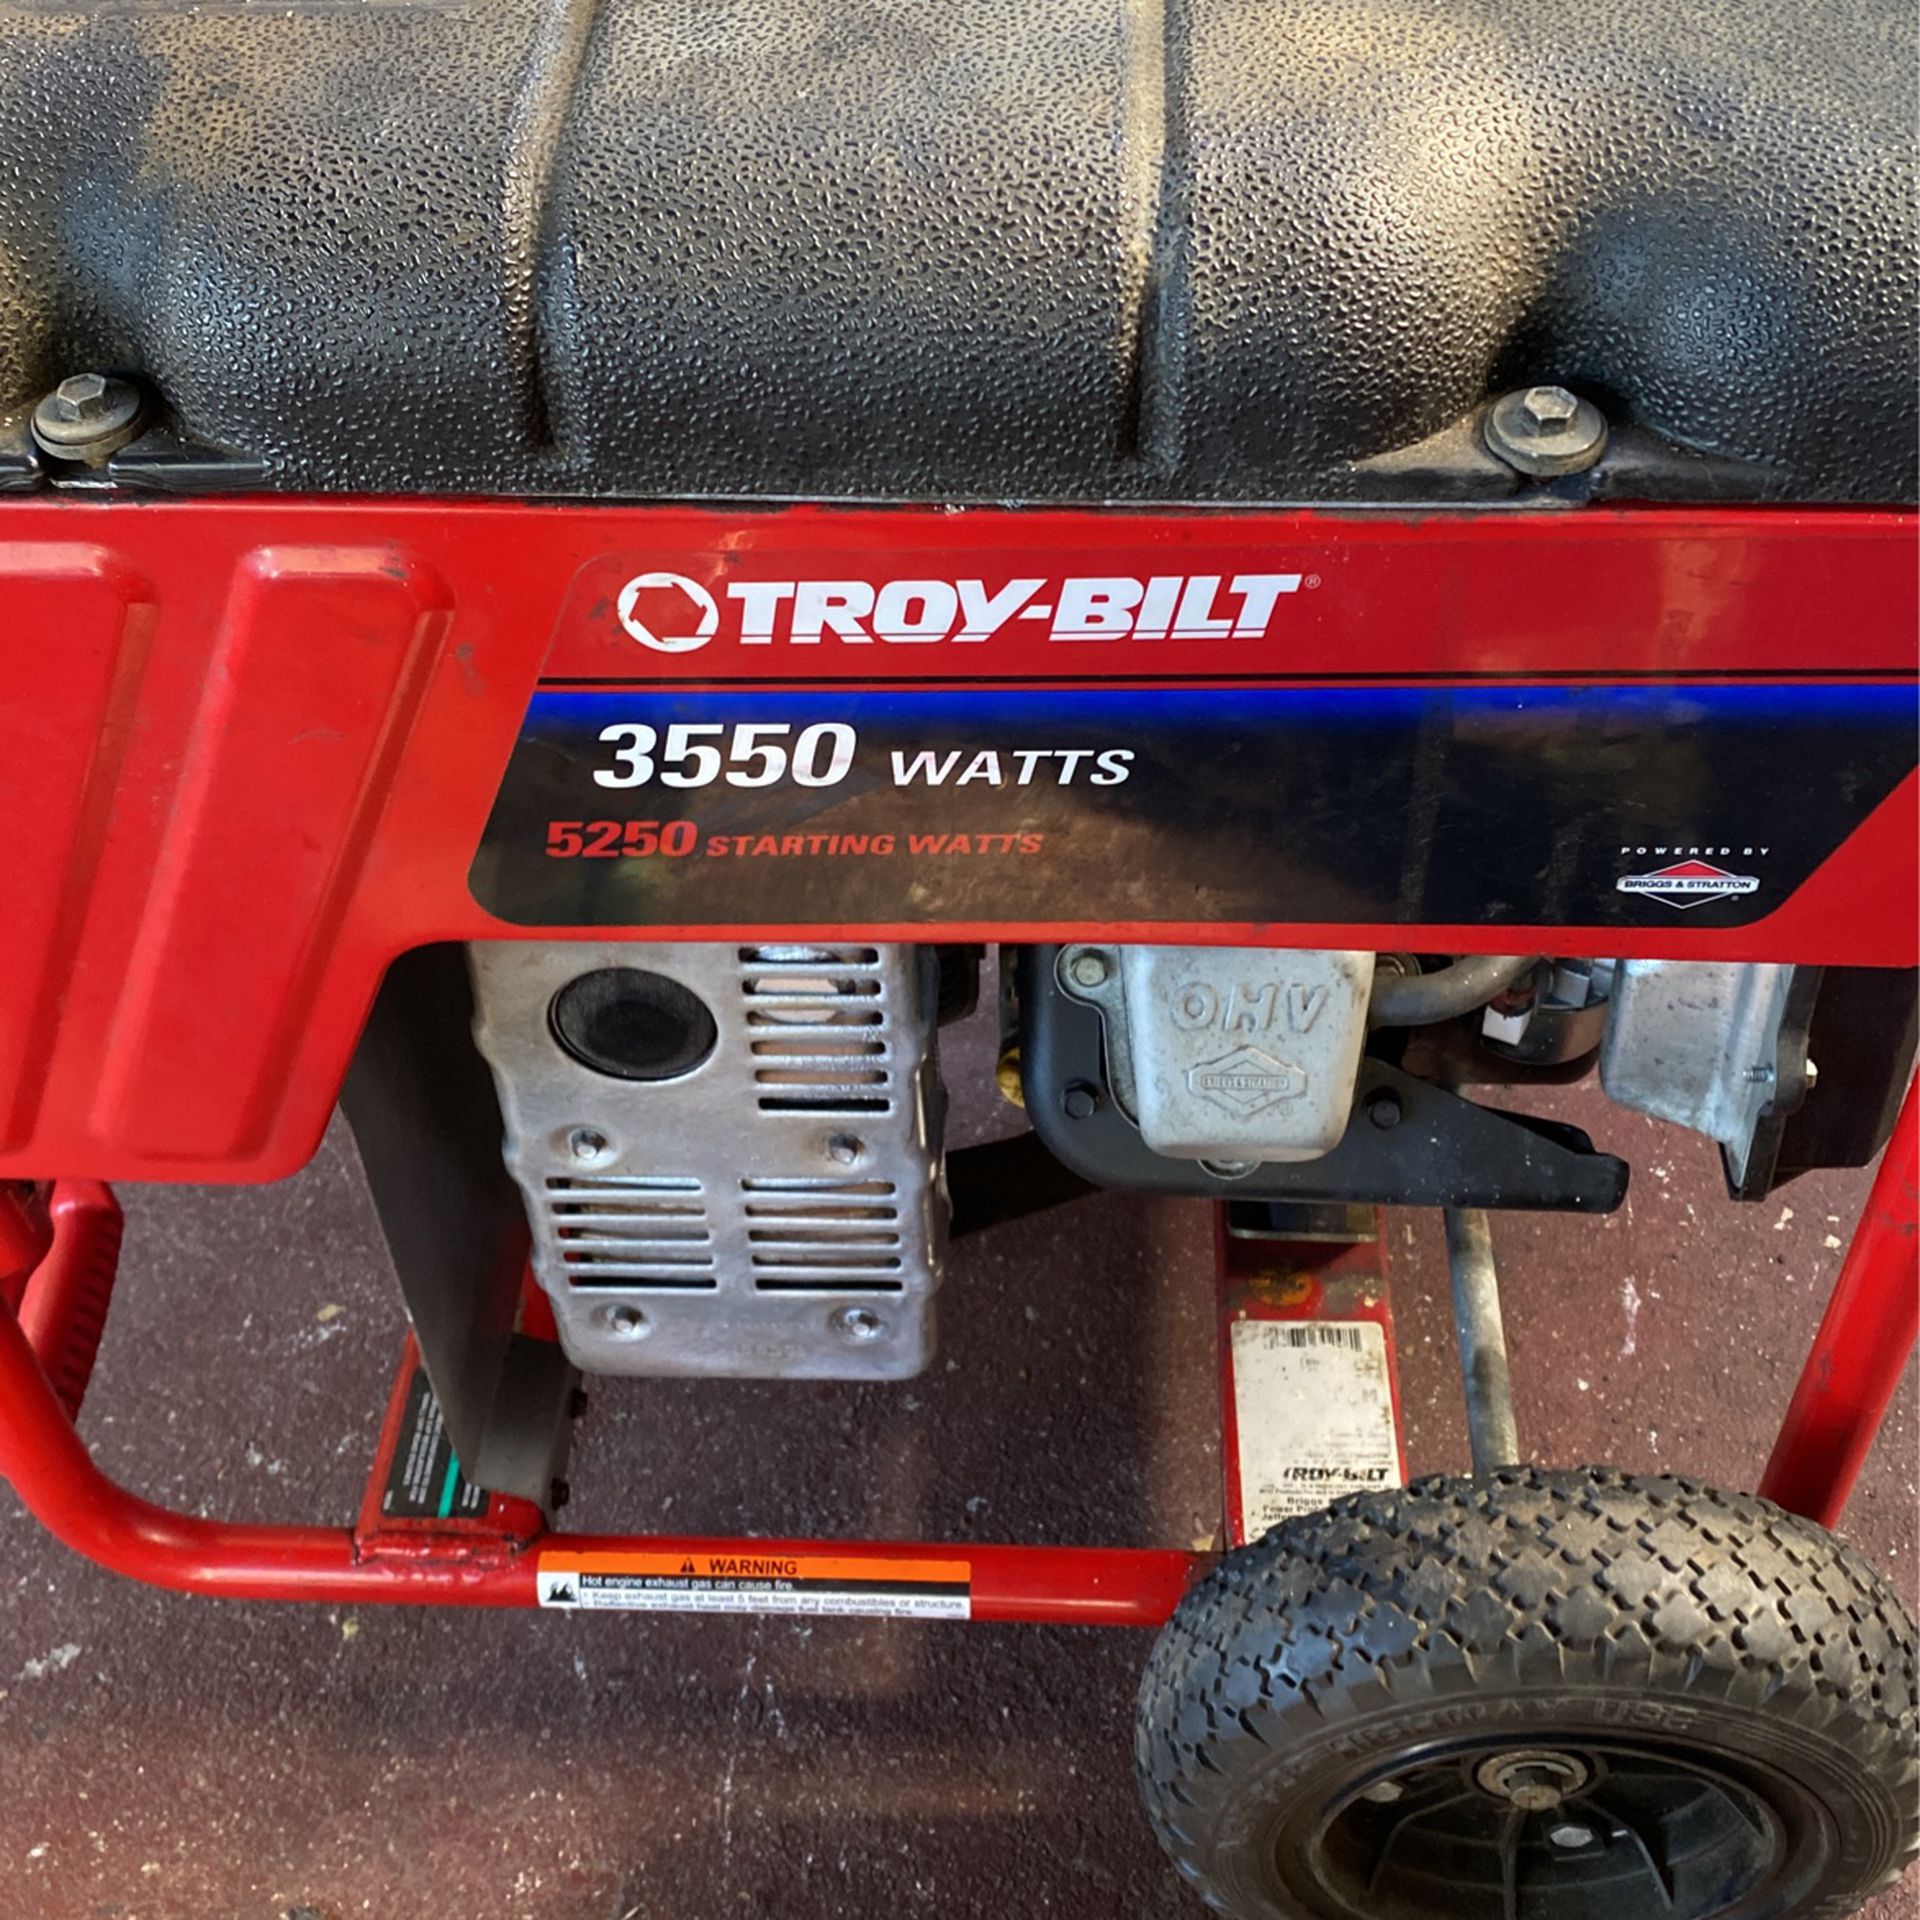 Troy Bilt with 7HP, new tires and new carburetor. Starts first pull.